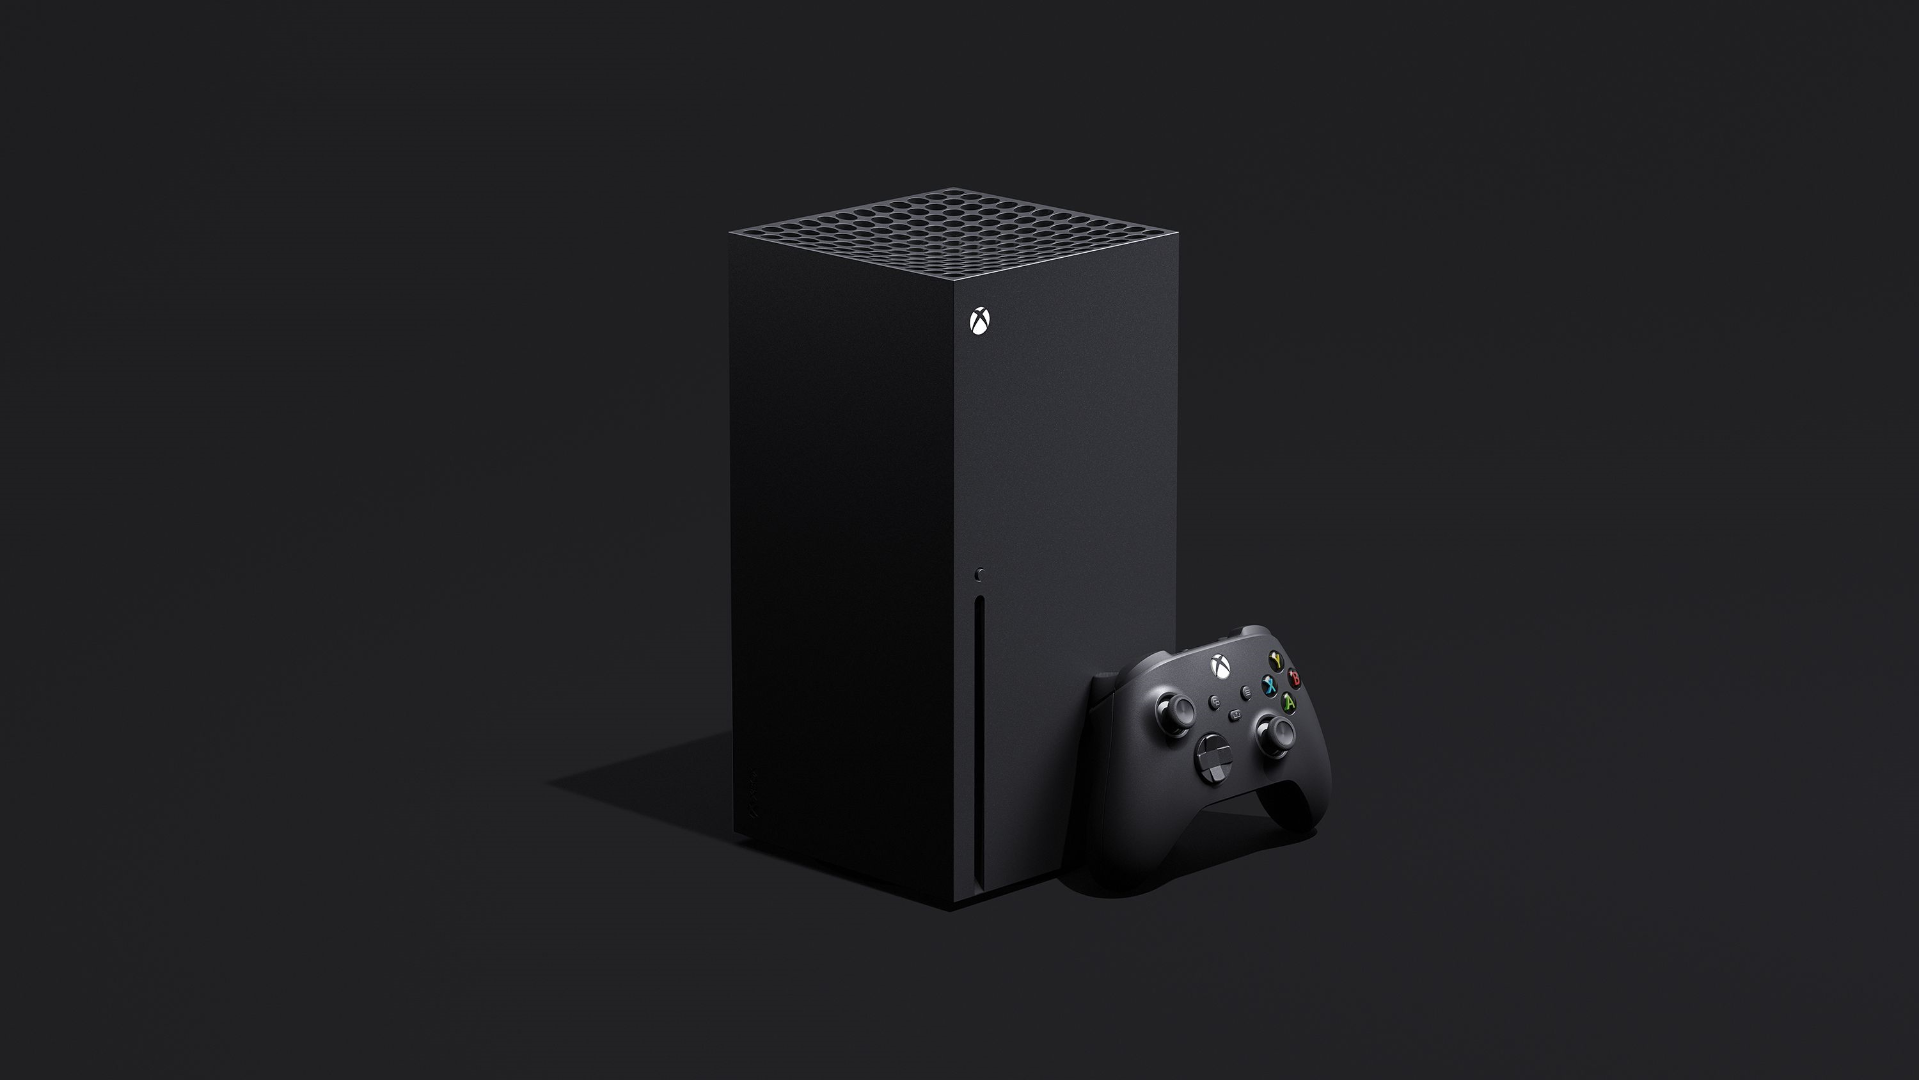 Media asset in full size related to 3dfxzone.it news item entitled as follows: AMD descrive il potente SoC della gaming console Xbox Series X di Microsoft | Image Name: news30550_AMD-Microsoft-Xbox-Series-X_1.png